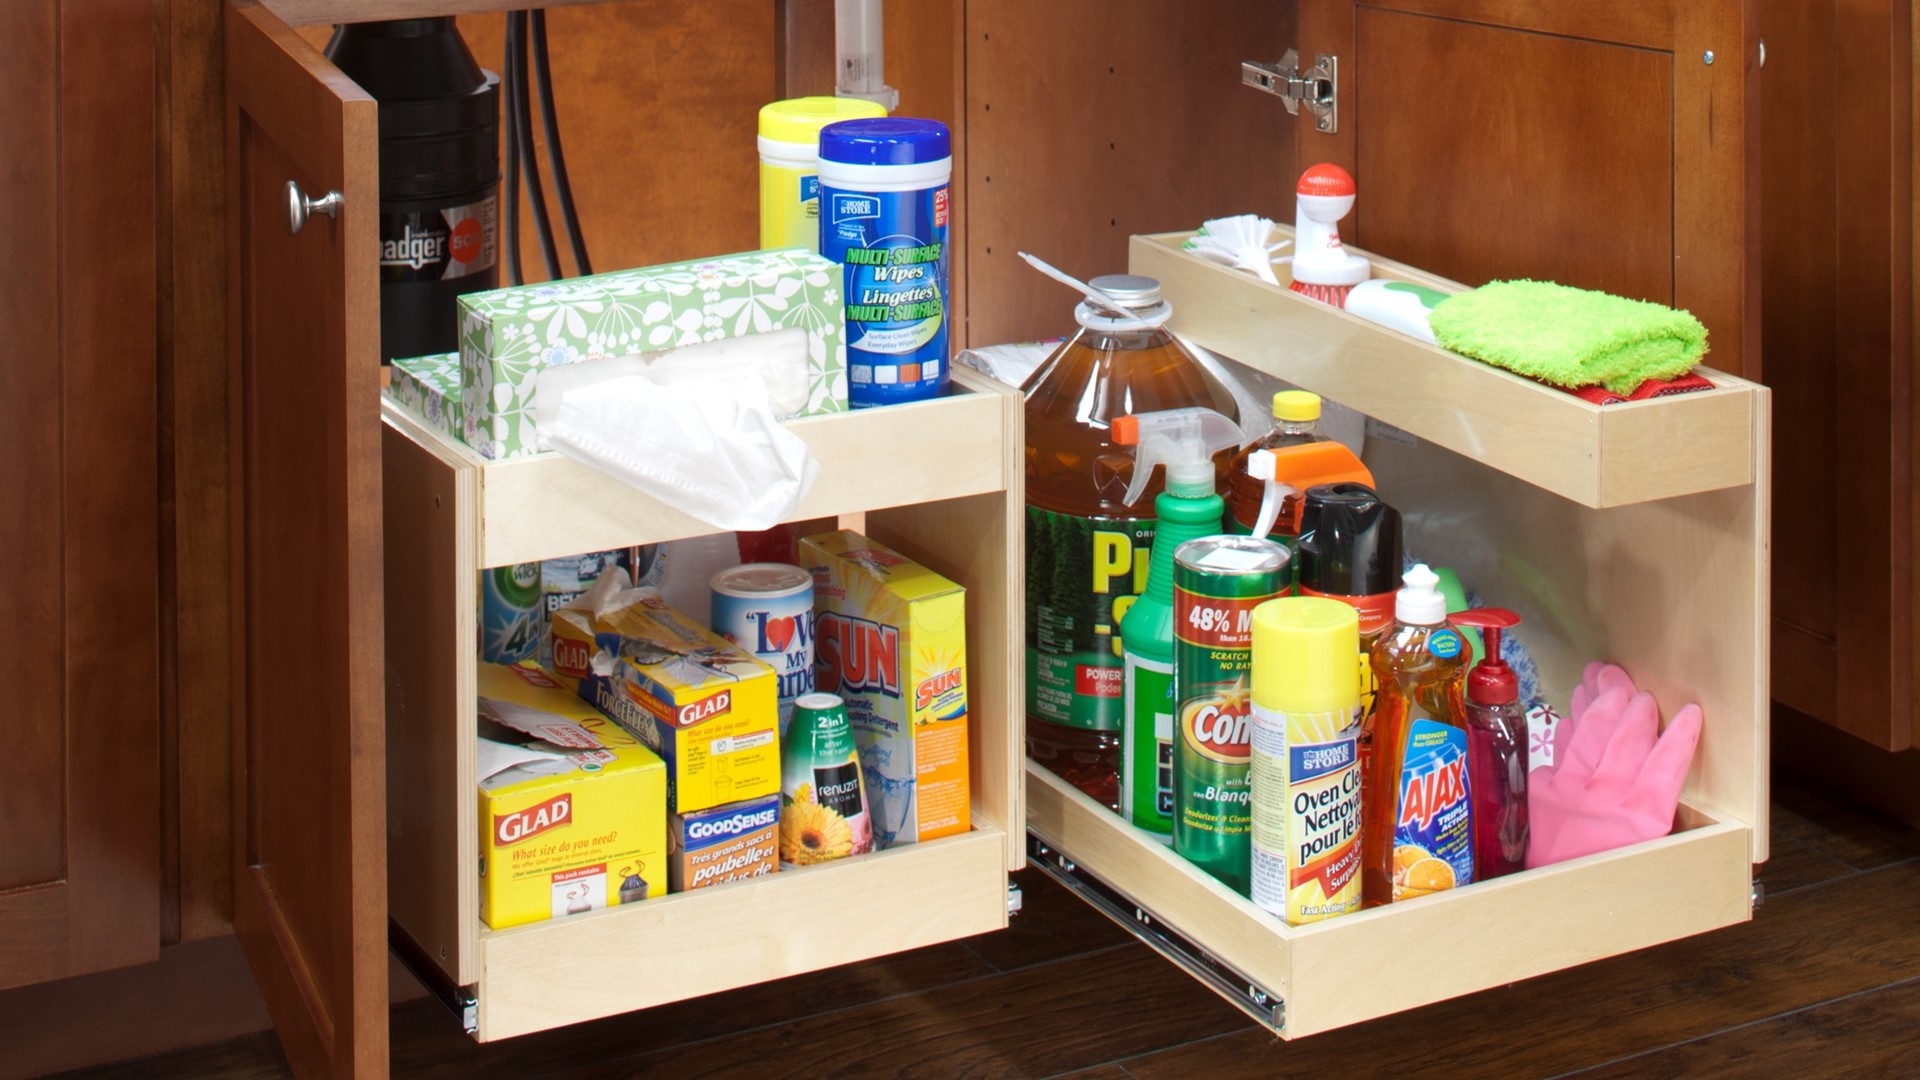 Custom-designed storage solutions add more space, organization, and accessibility to your existing cabinets.  Sponsored by ShelfGenie of Seattle